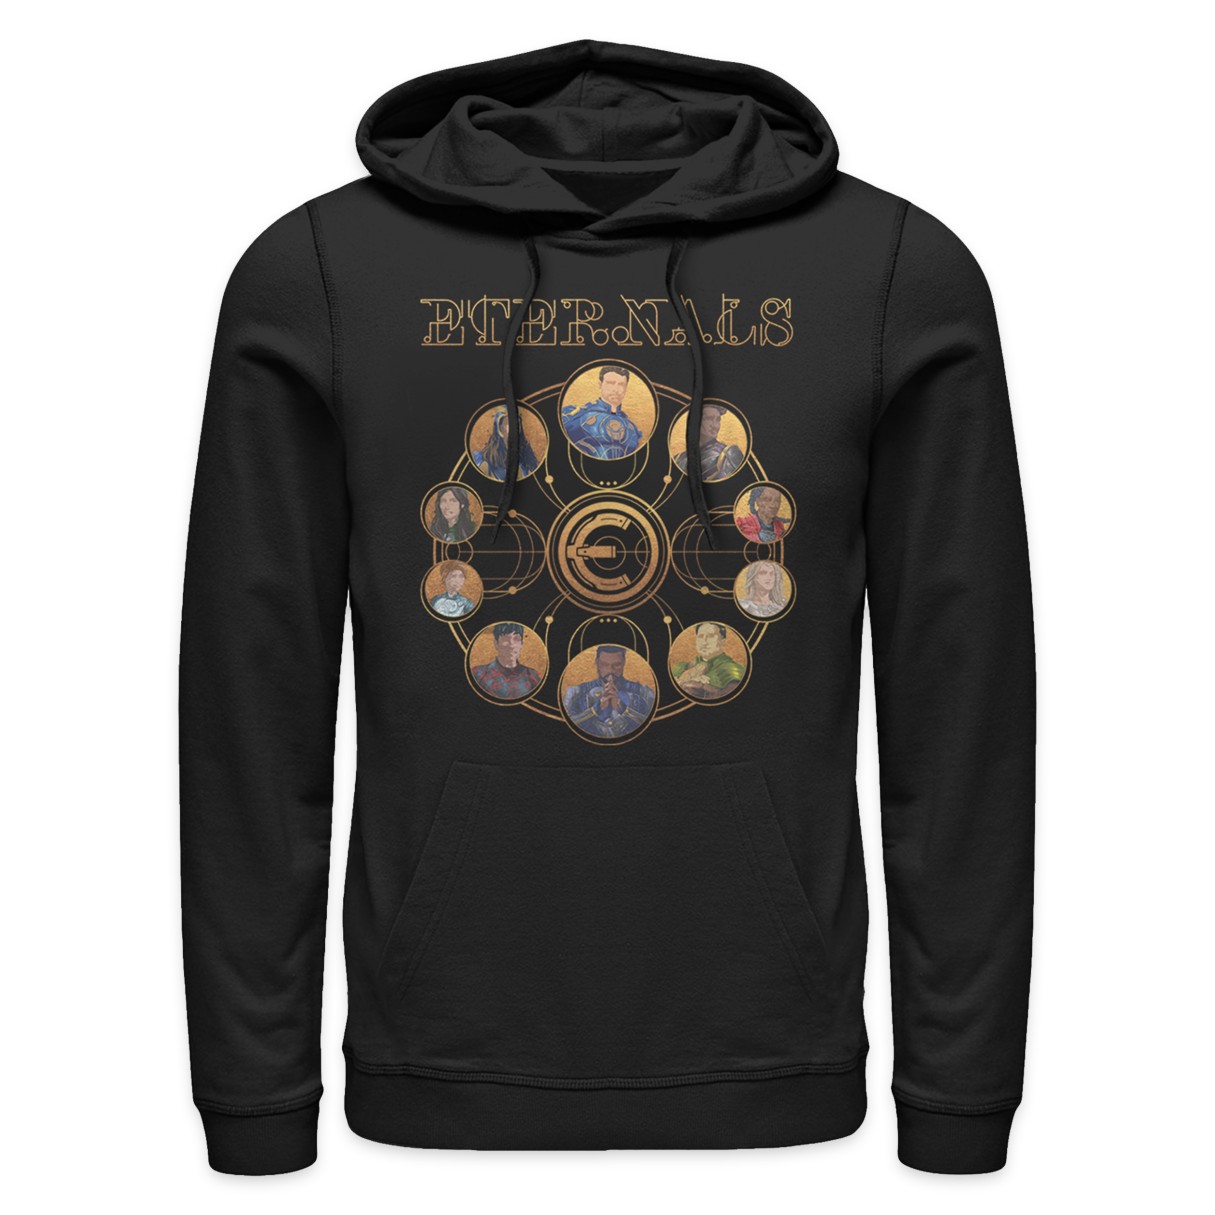 Eternals Pullover Hoodie for Adults